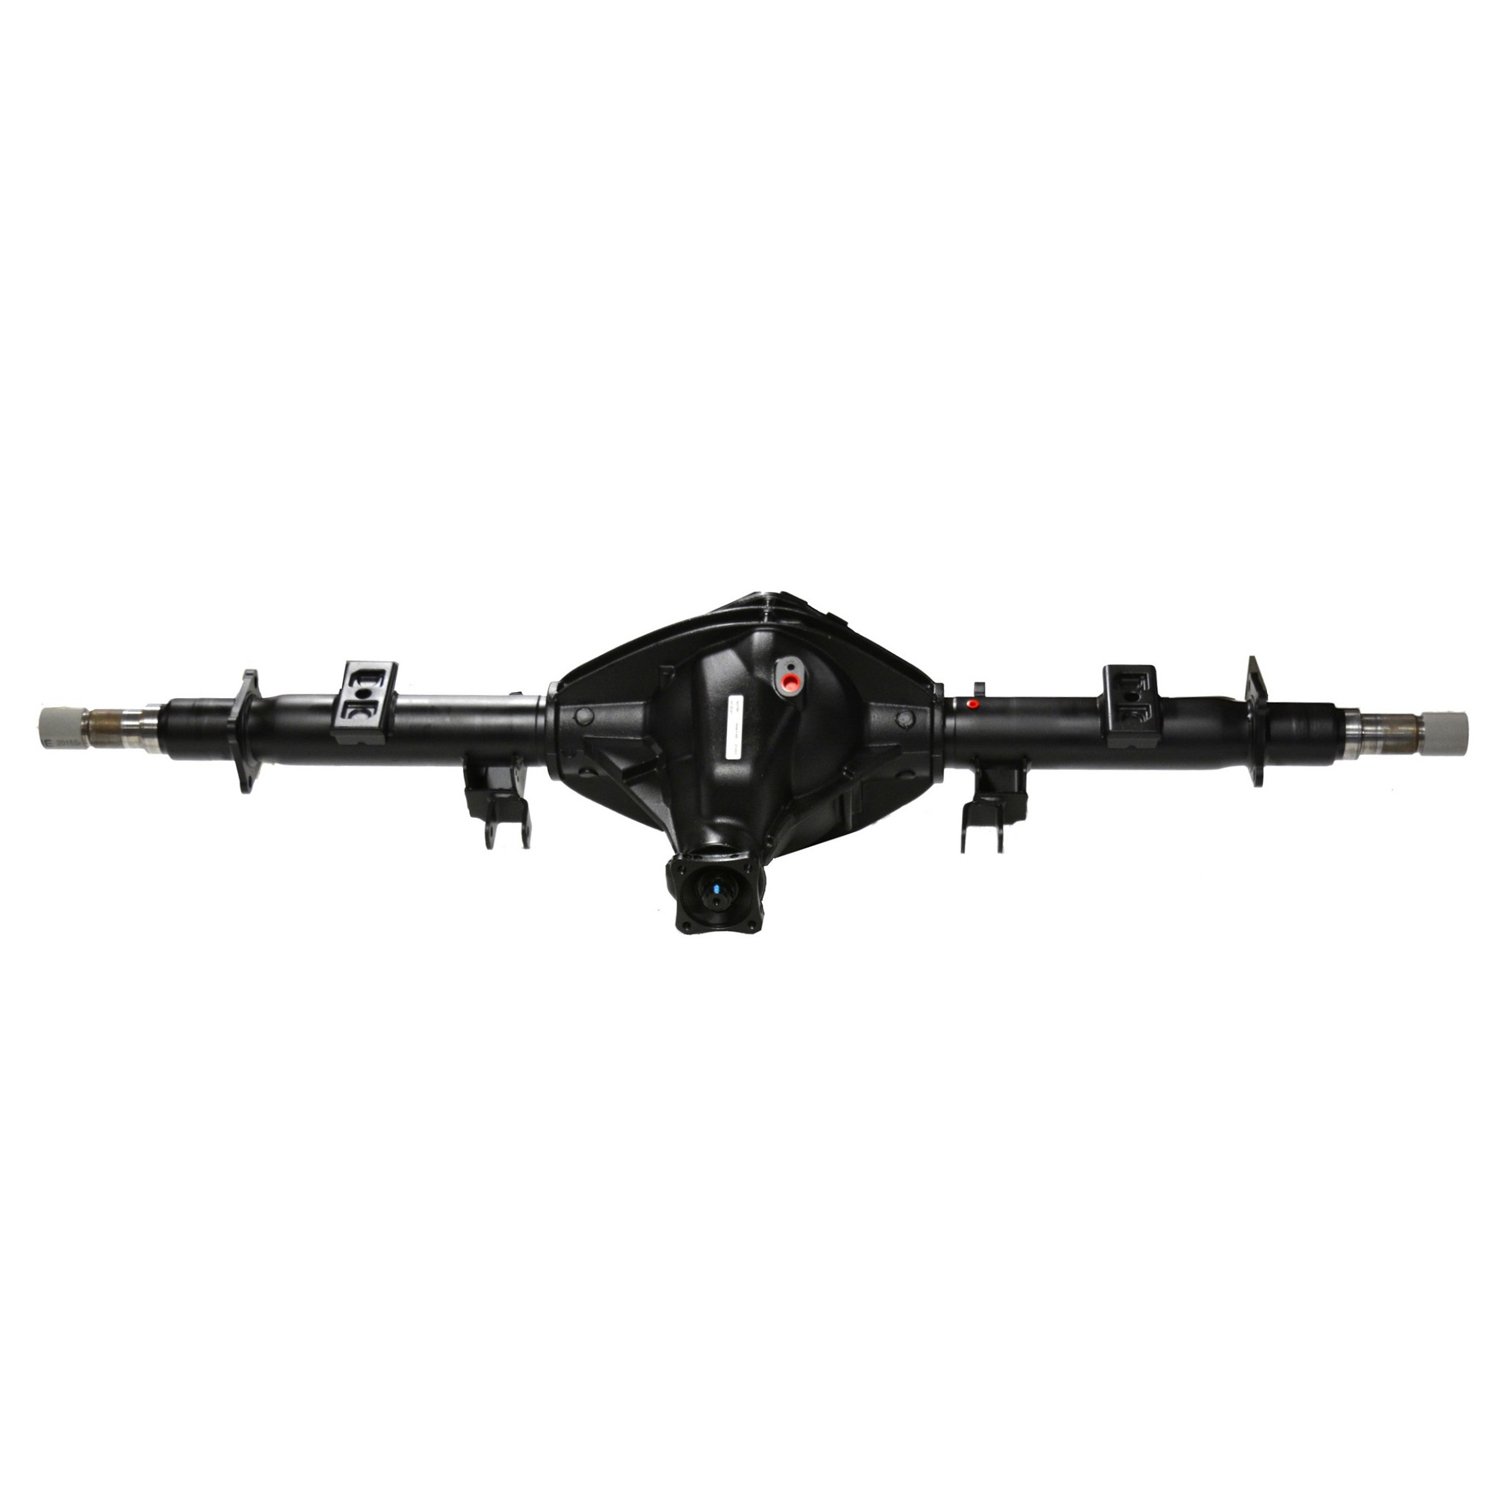 Remanufactured AAM 11.5" AXLE ASSY '07-'08 CHY RAM DRW 3500 CAB CHASSIS, 4.10, 2WD & 4WD, POSI